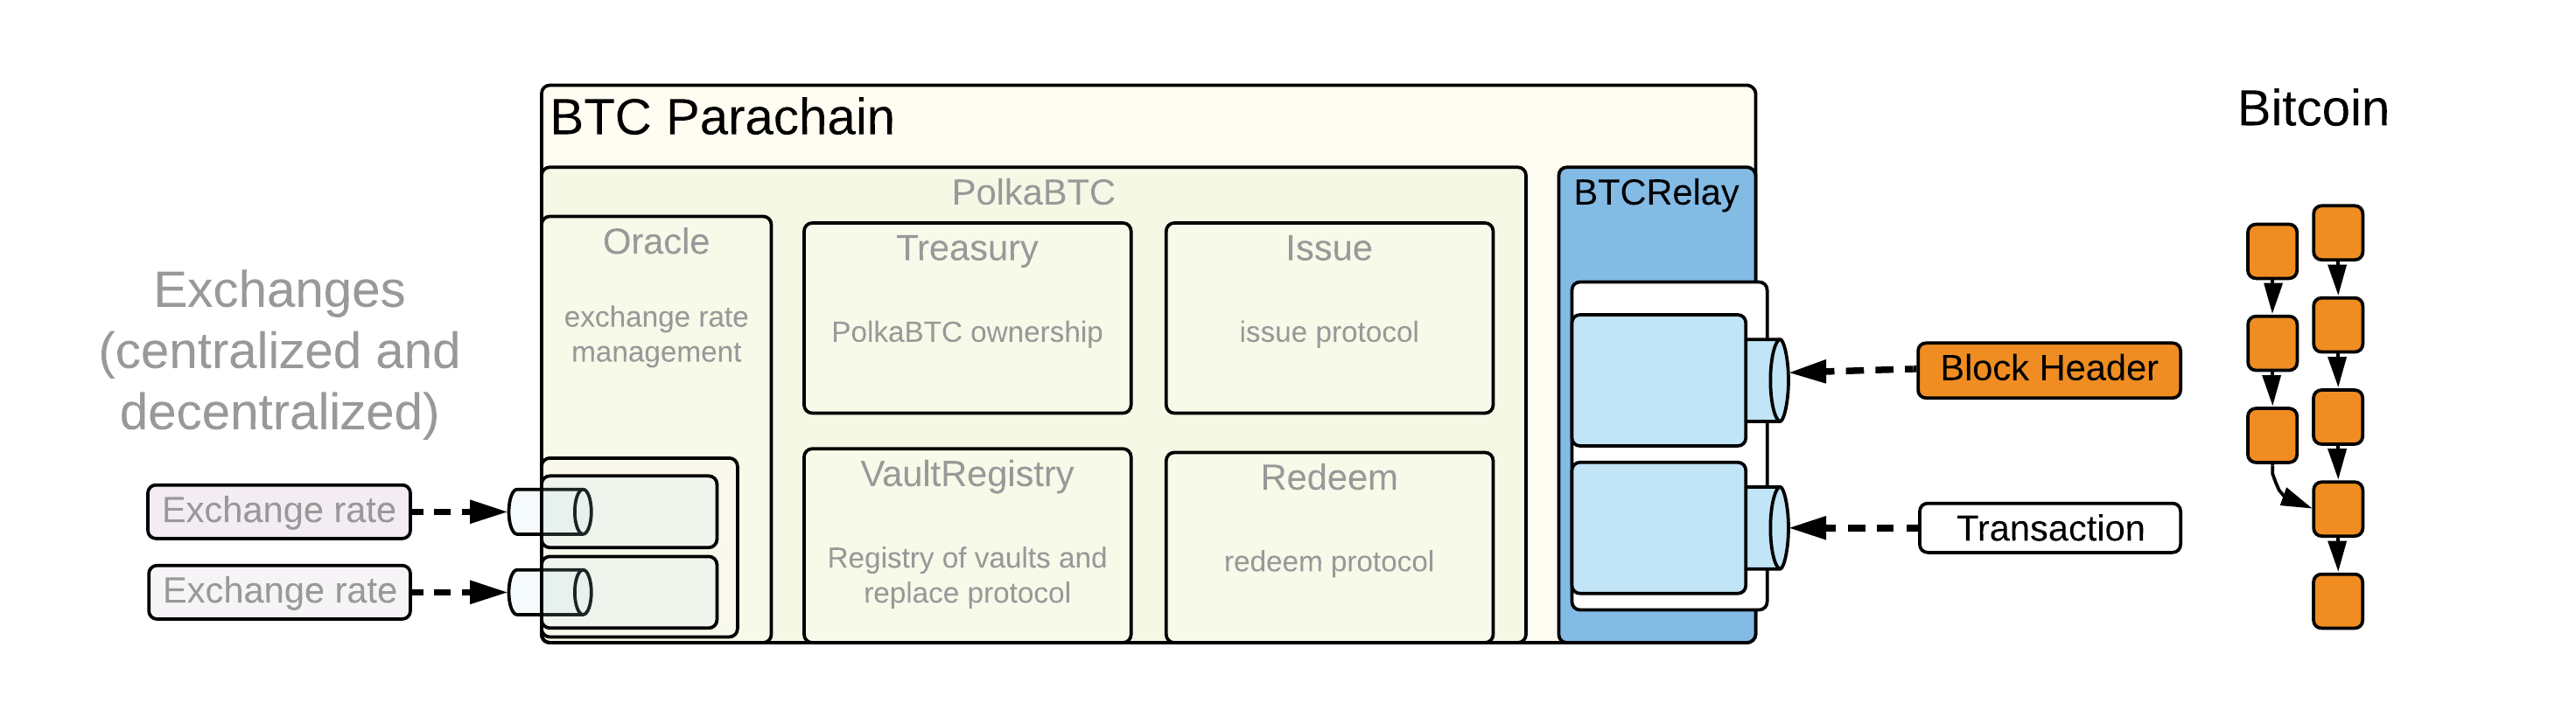 Overview of BTC-Relay as a component of the BTC Parachain